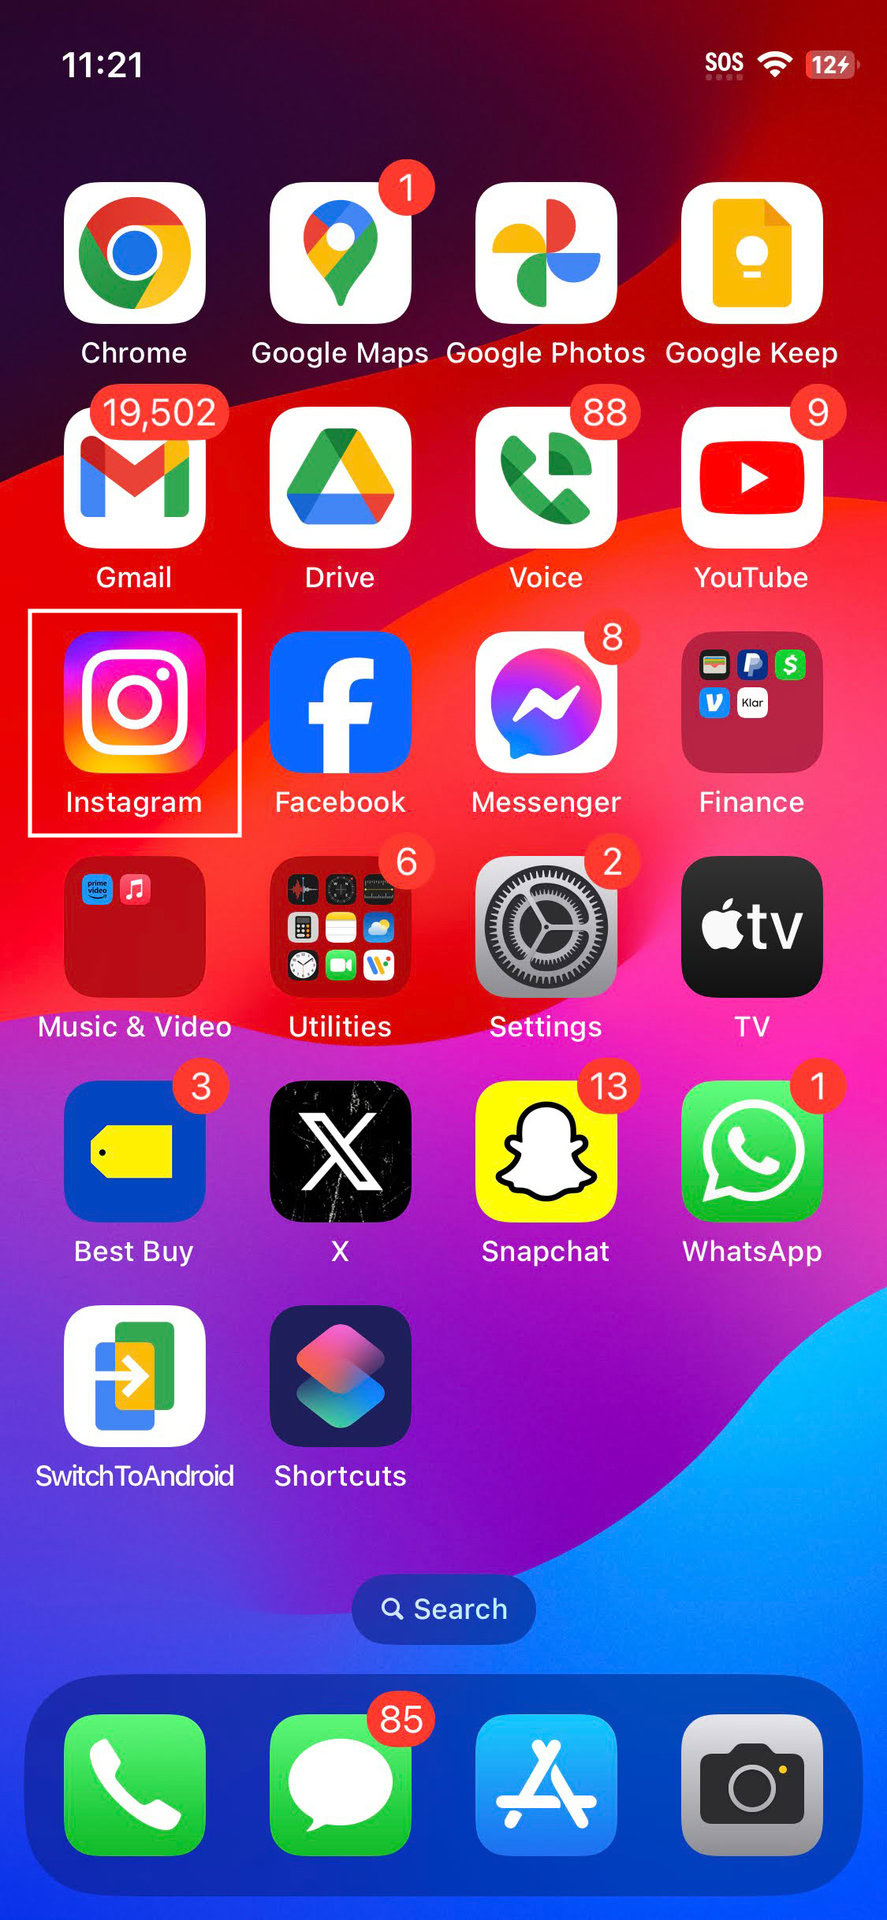 How to uninstall apps on iPhone (1)